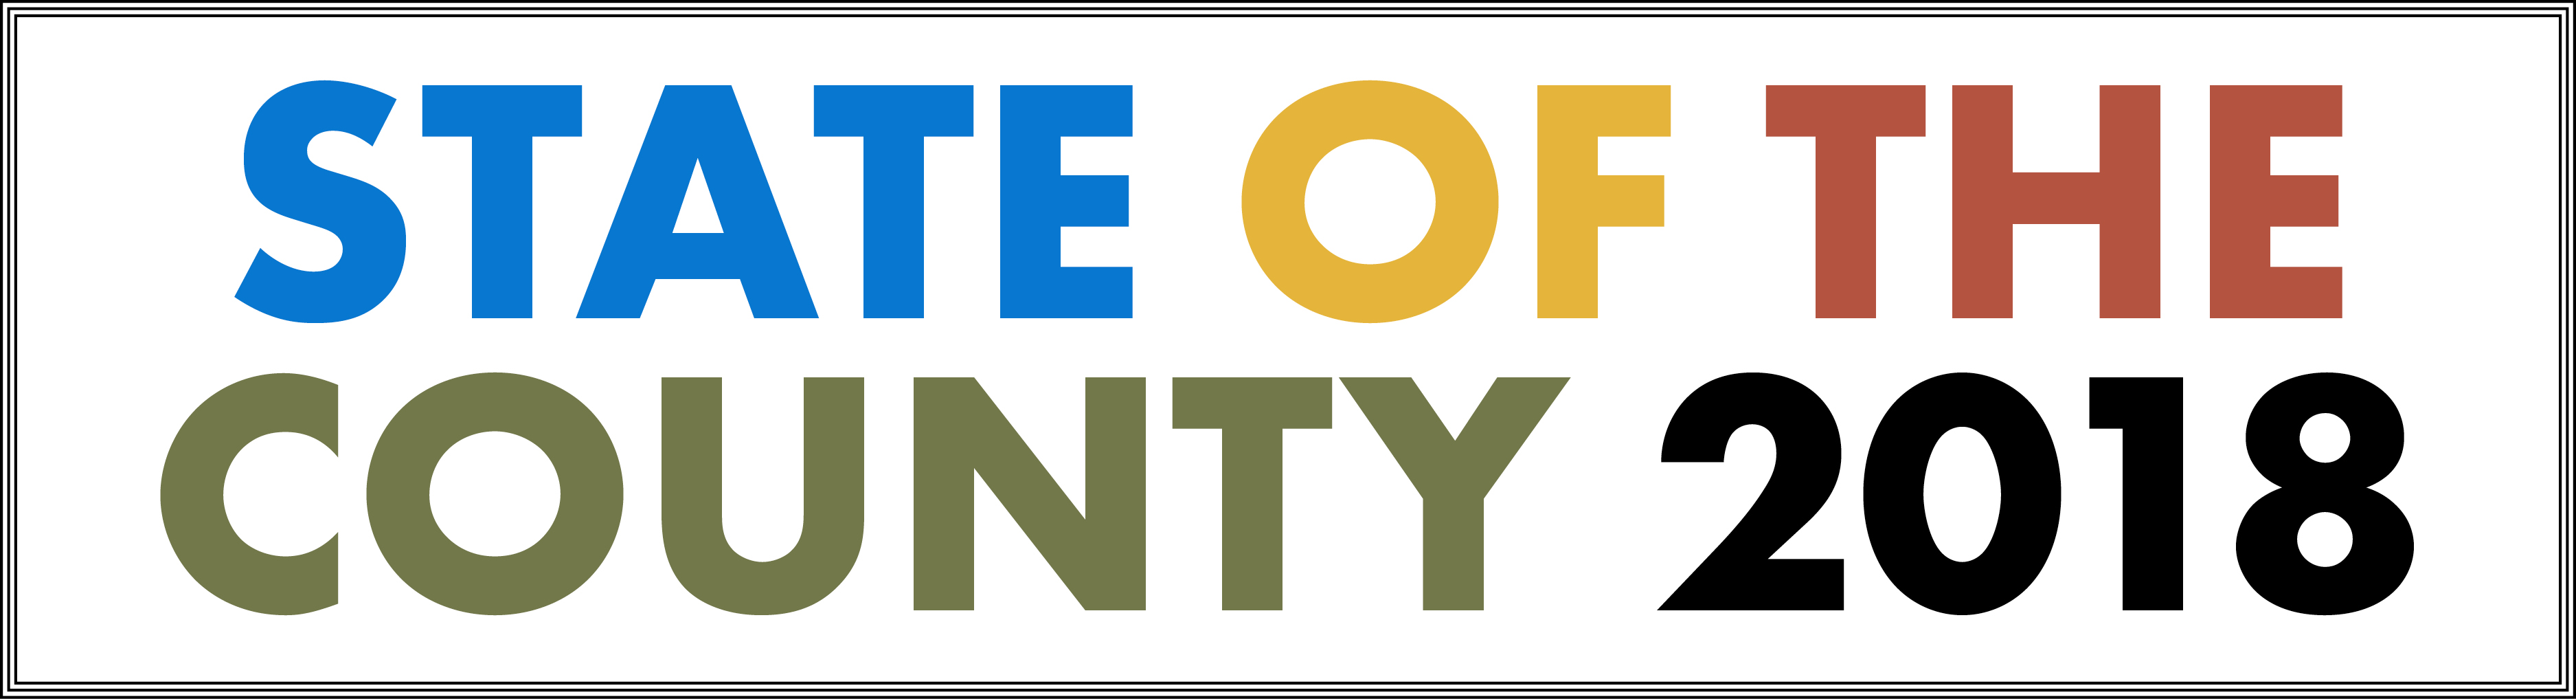 State of the County 2018